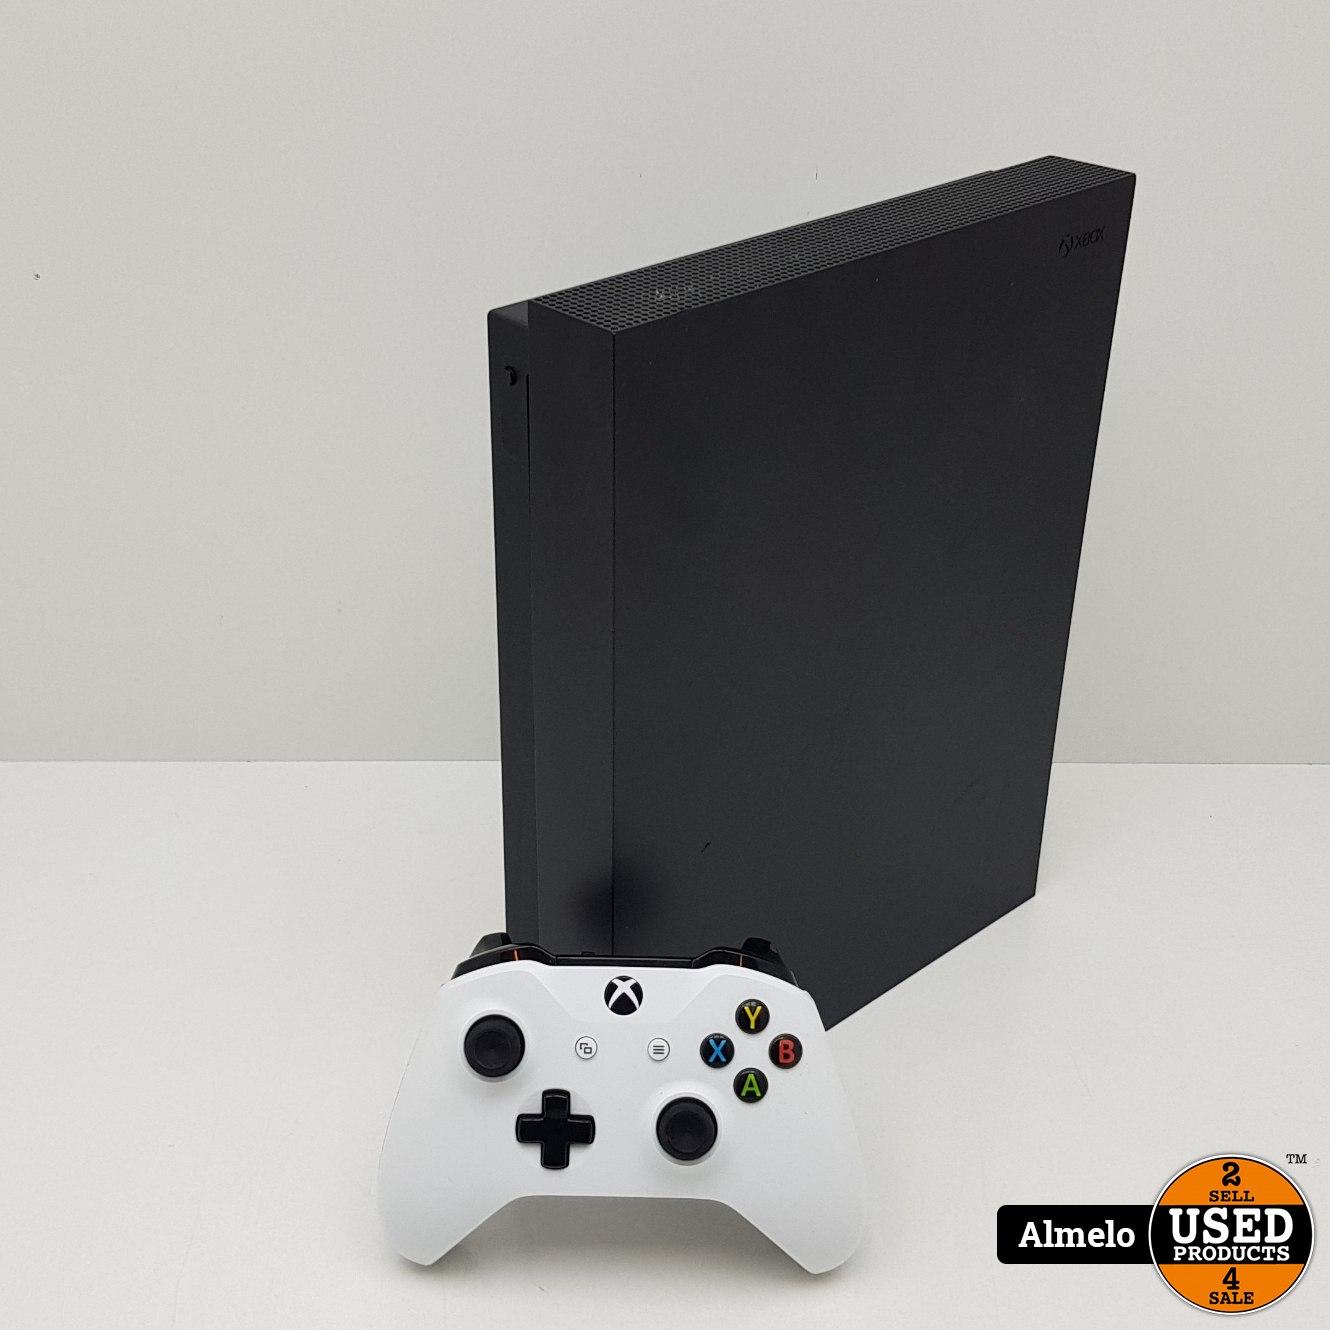 Meer Slordig accent Xbox one X 1TB - Used Products Almelo